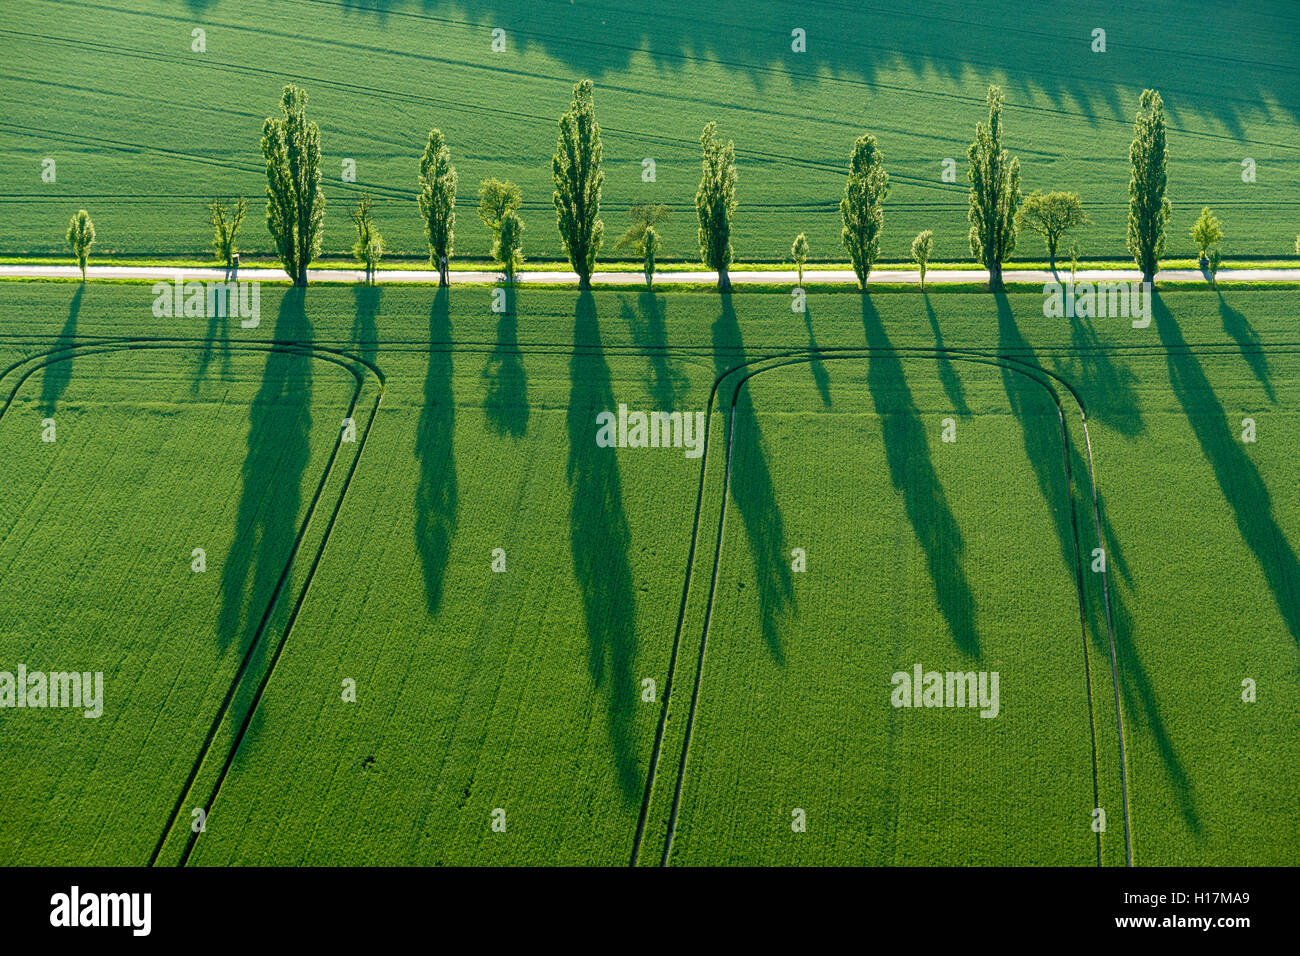 A row of Poplar trees (Populus) is creating long shadows on a green field, Königstein, Saxony, Germany Stock Photo